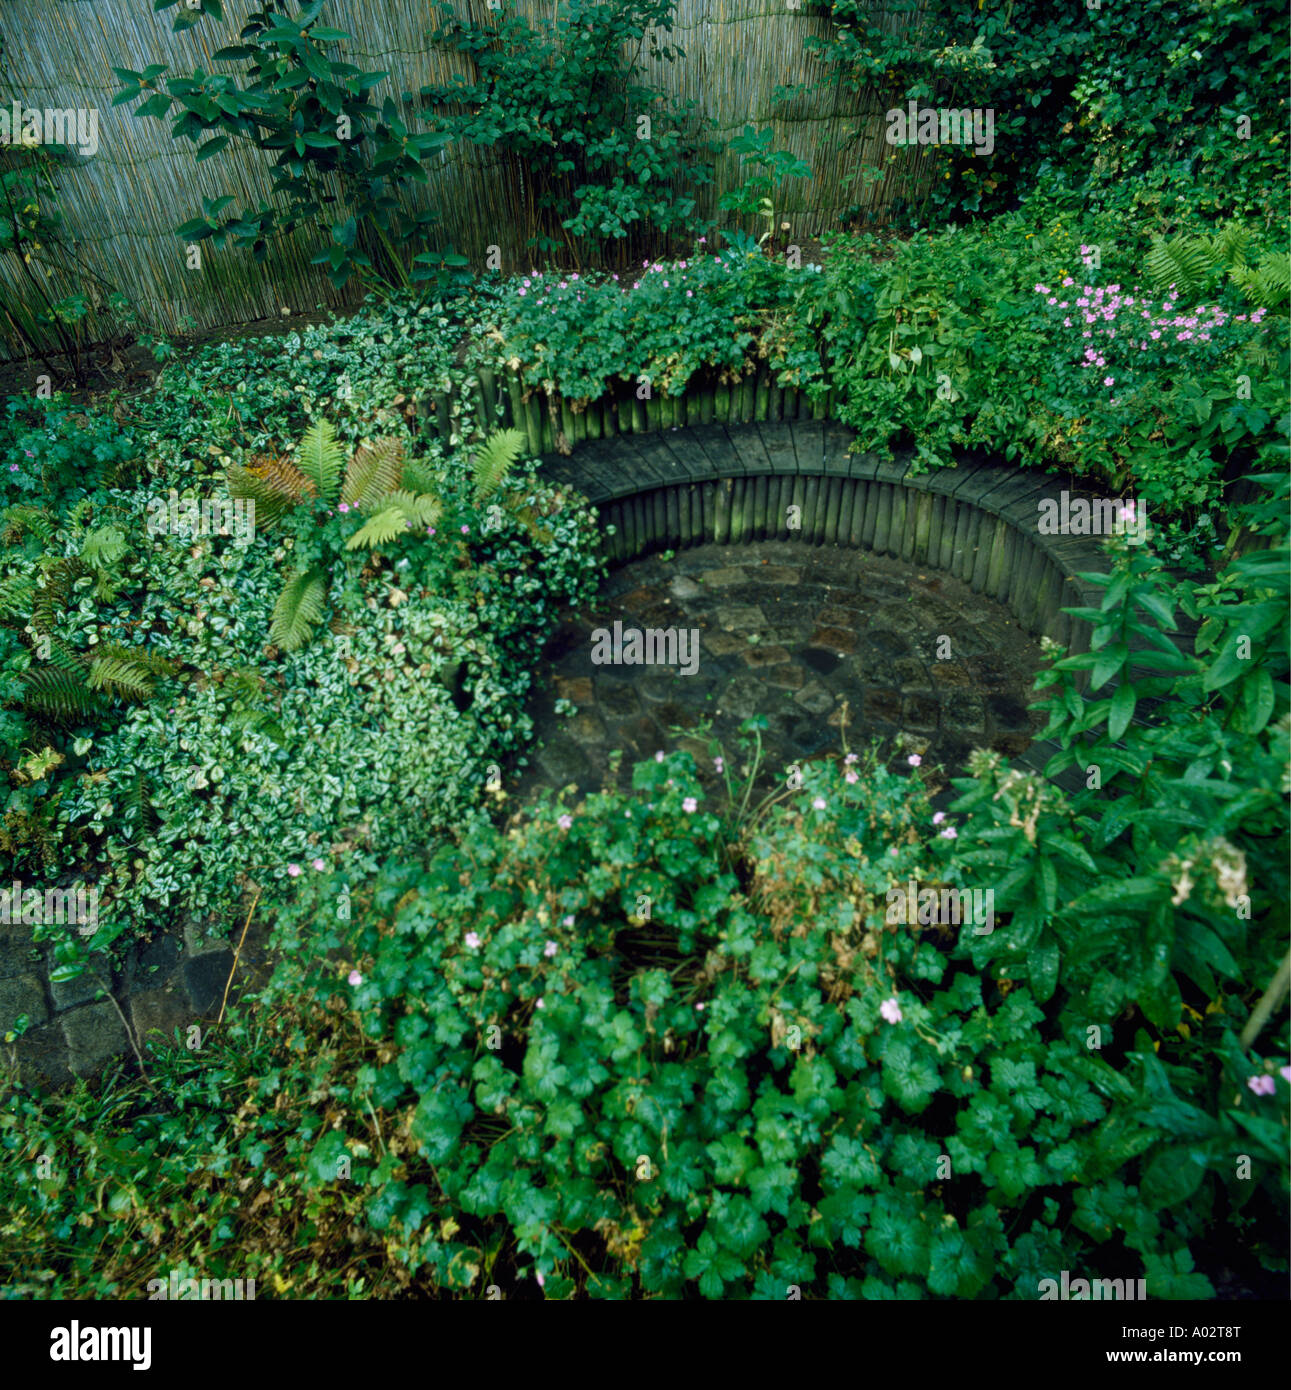 Paved circular sunken garden with green ground cover Stock Photo